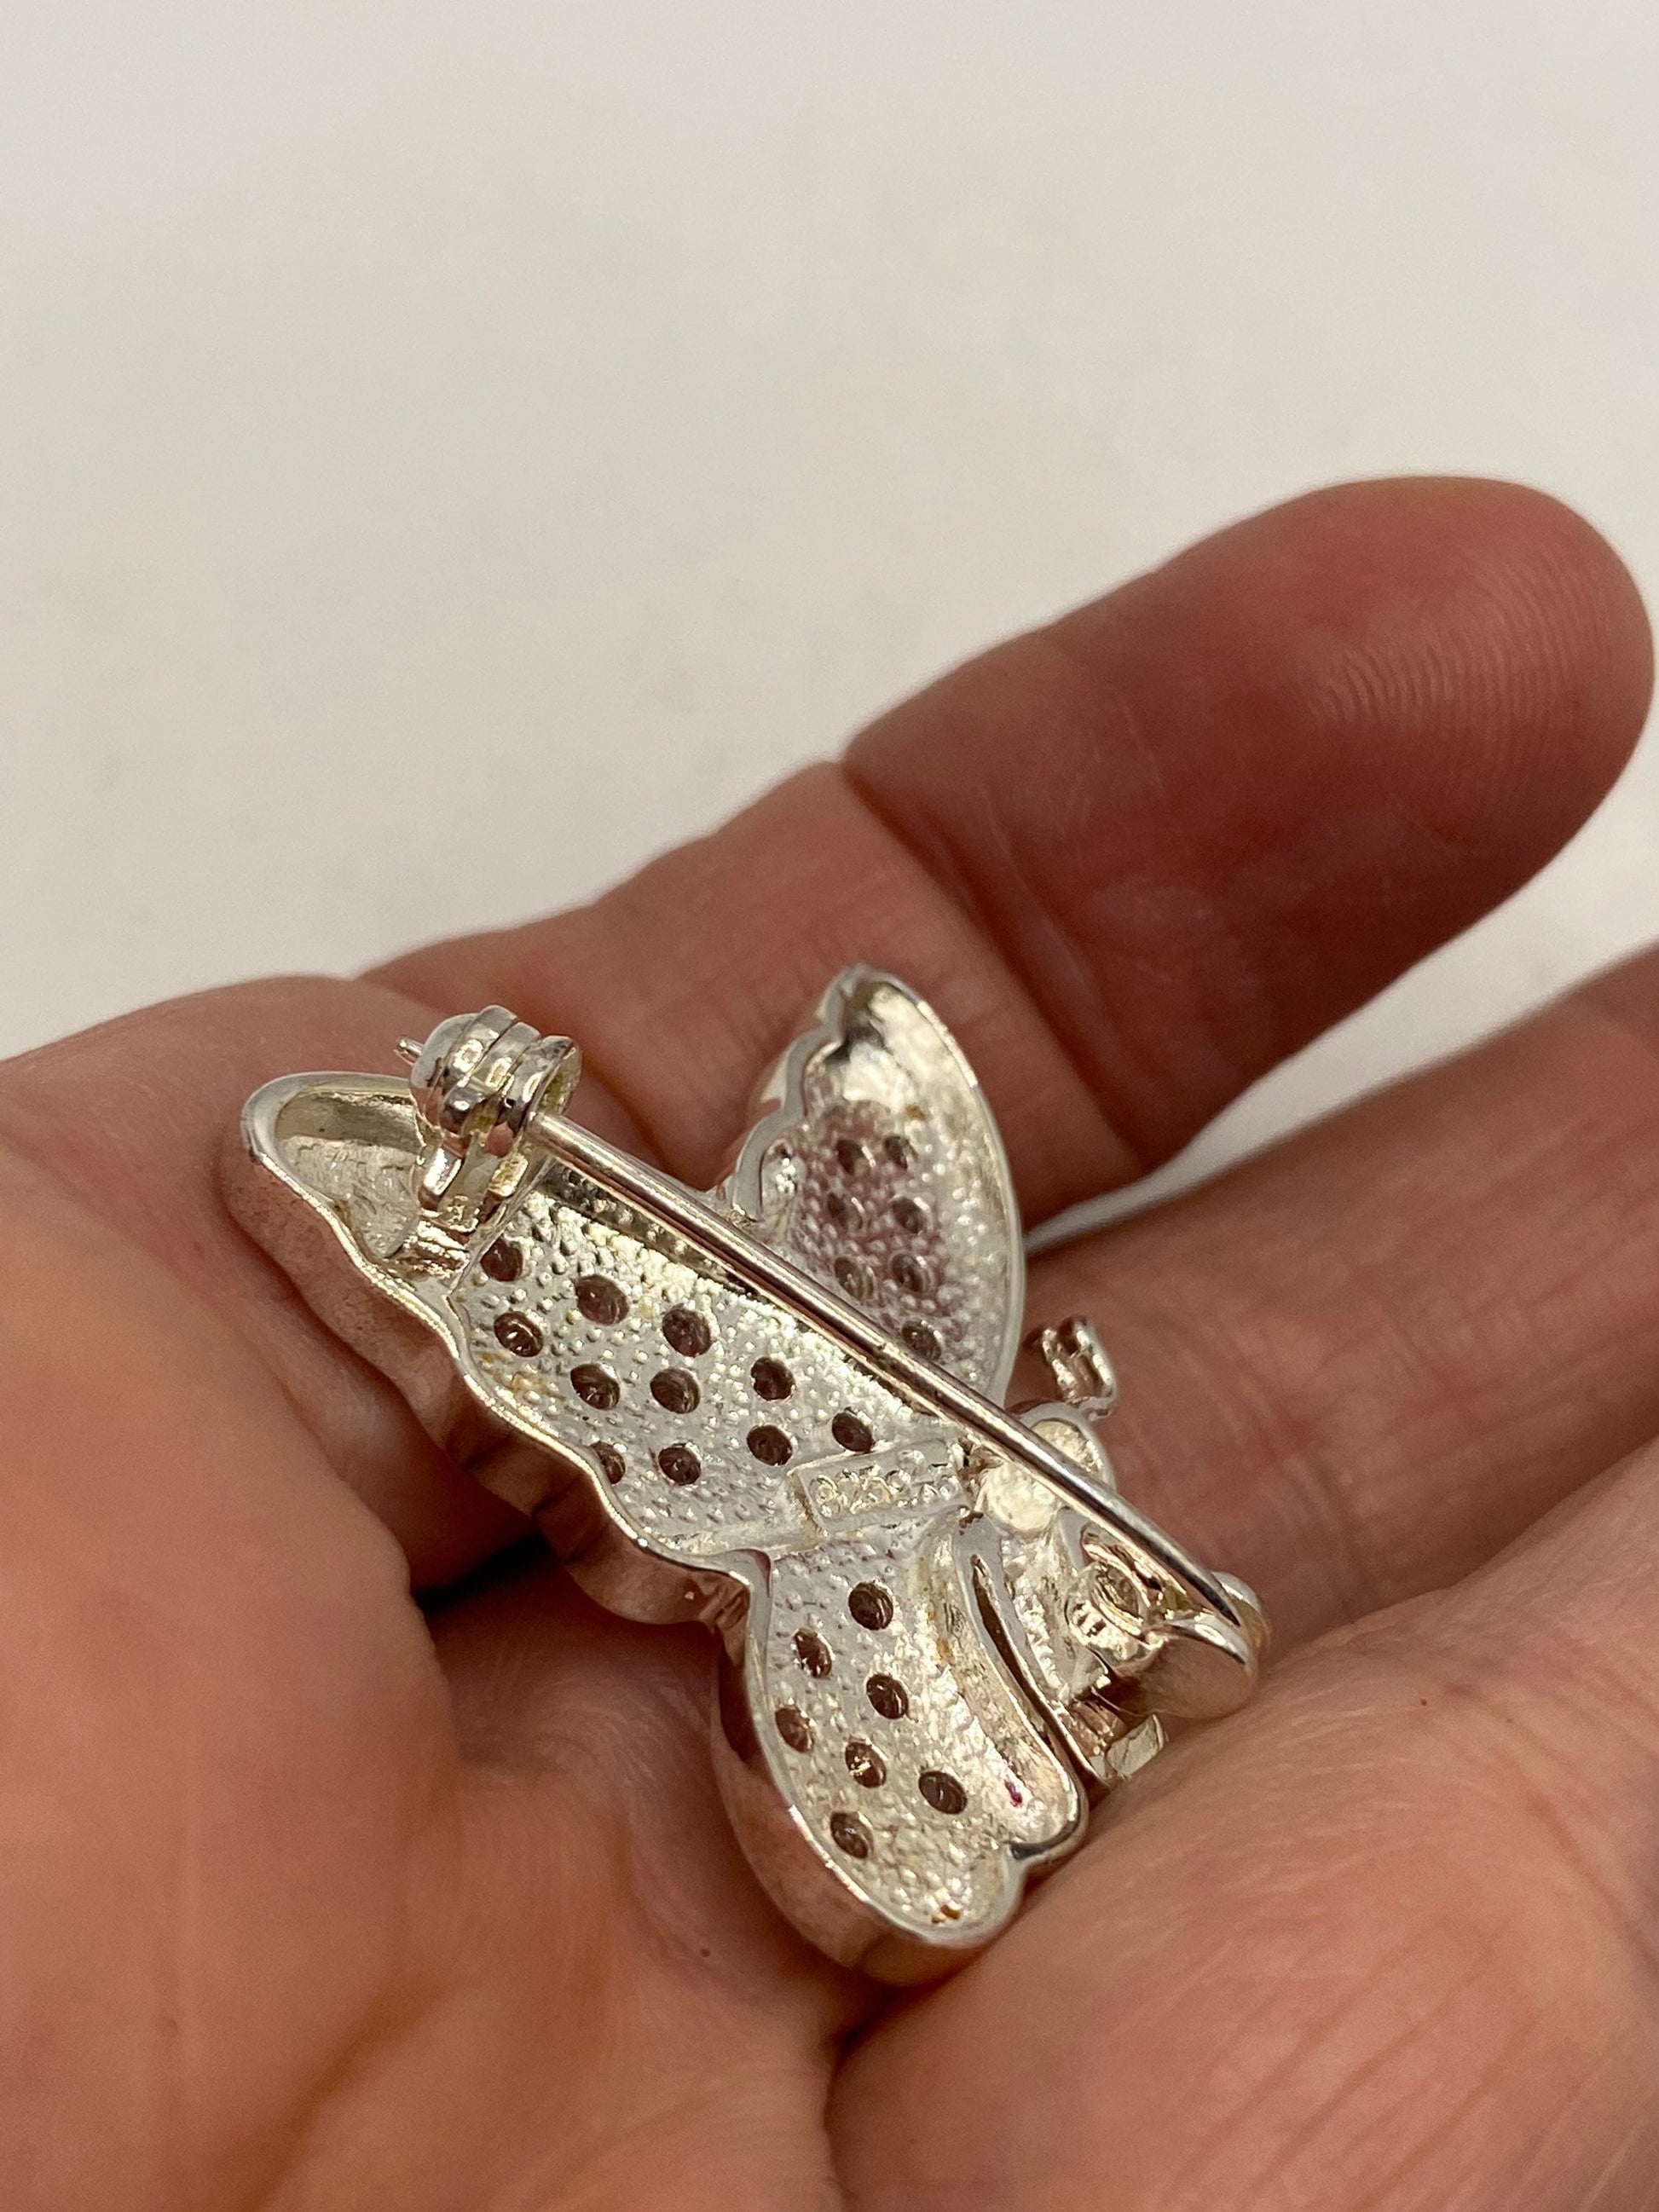 Vintage White Sapphire Pin 925 Sterling Silver Butterfly Brooch